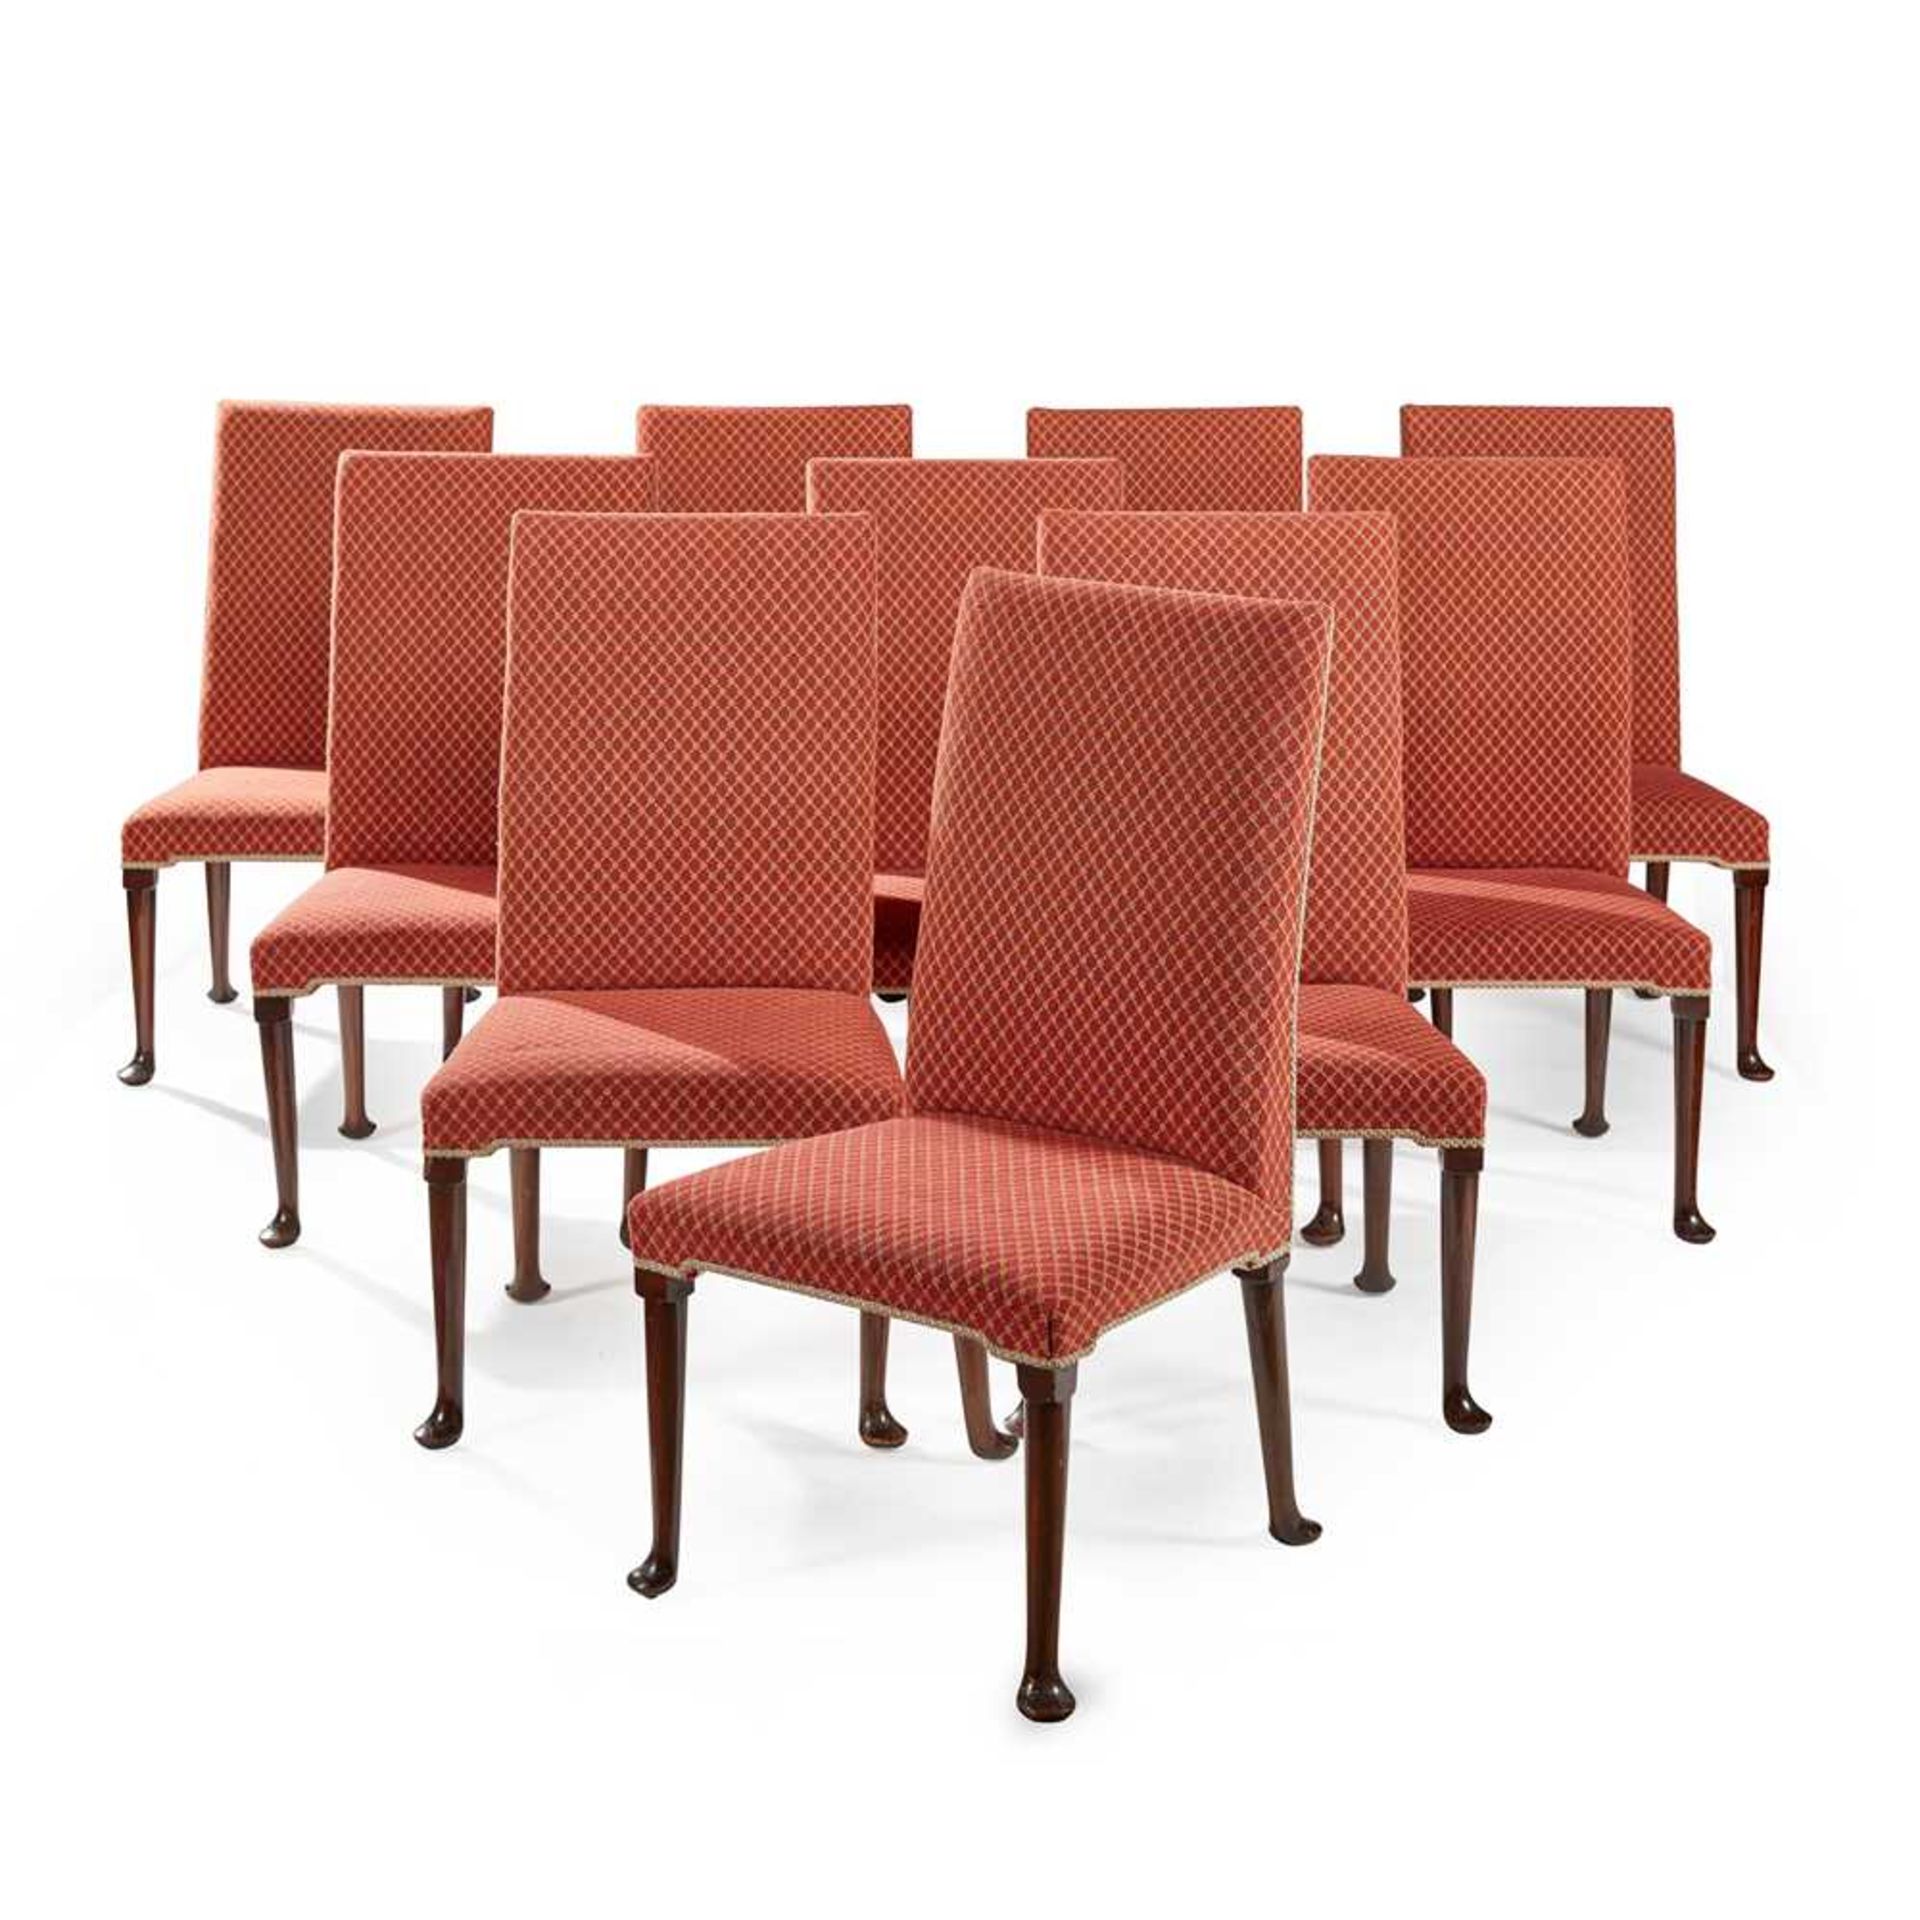 SET OF TEN GEORGIAN STYLE UPHOLSTERED MAHOGANY DINING CHAIRS LATE 20TH CENTURY